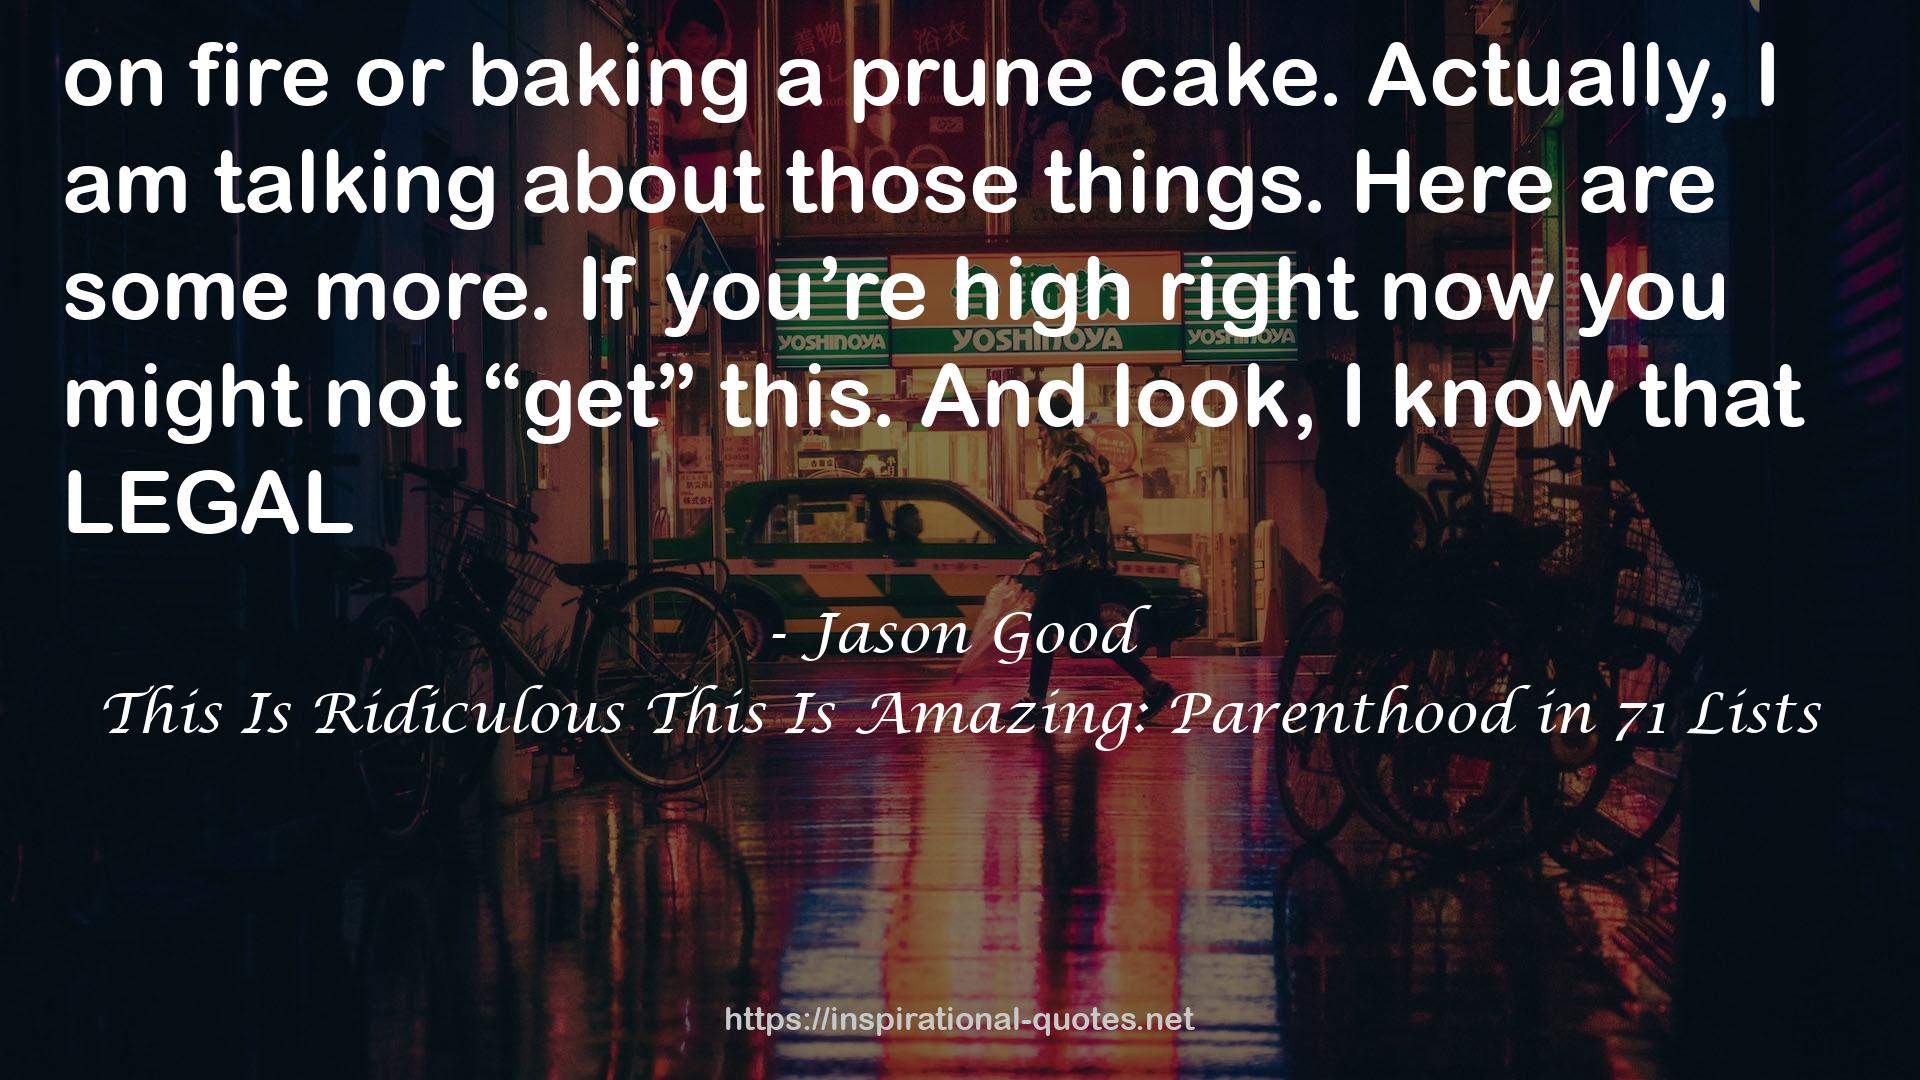 This Is Ridiculous This Is Amazing: Parenthood in 71 Lists QUOTES